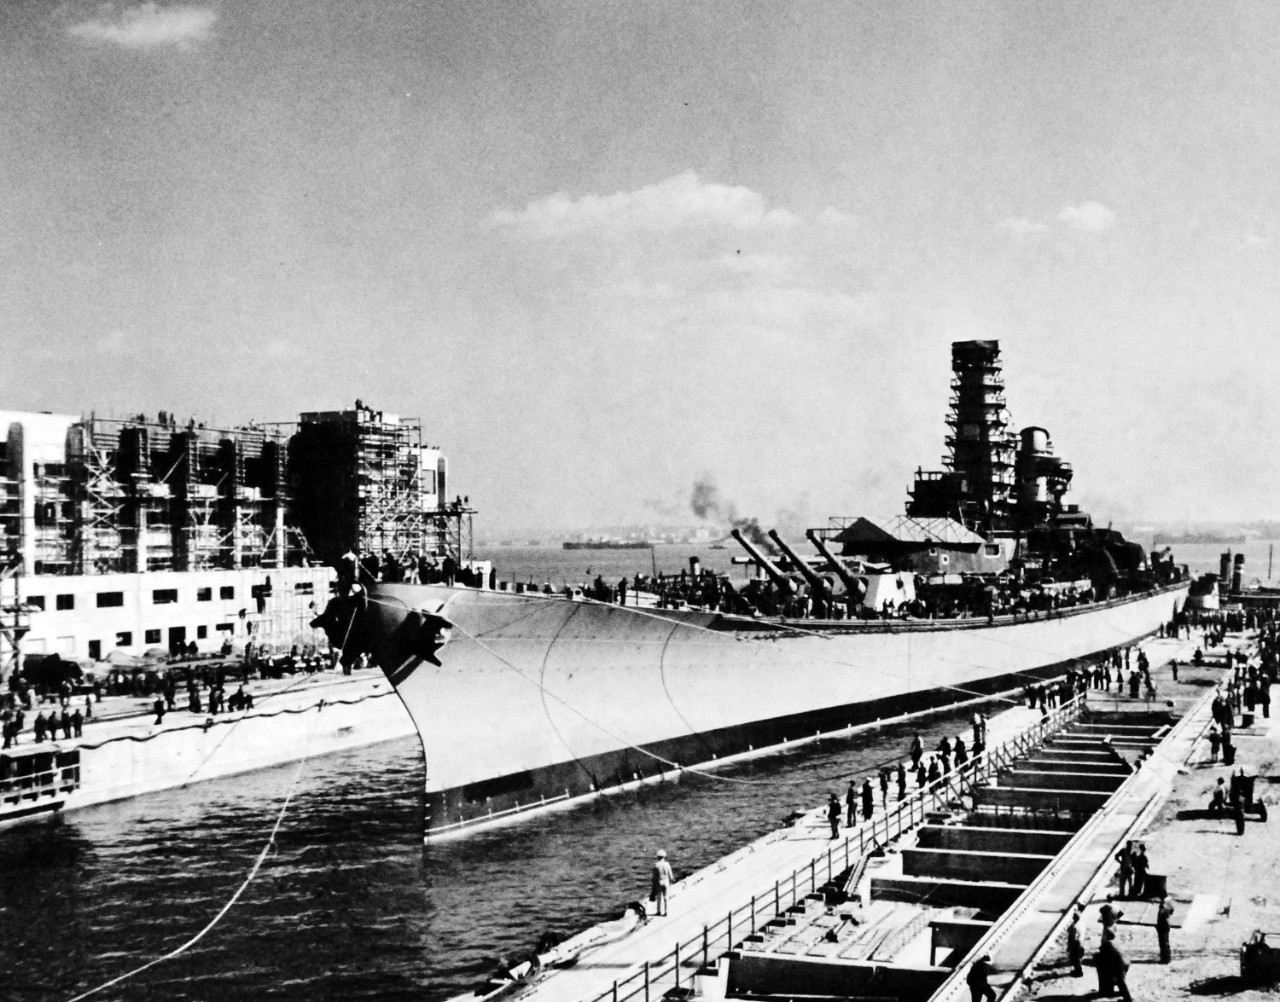 80-G-13556:  USS Iowa (BB 61), 1942.    USS Iowa leaves the New York Navy Yard for completion at the specially built Naval Supply Base, Bayonne, New Jersey, October 20, 1942.  The hull is secured in drydock.  Photograph released by Public Relations, Third Naval District.    Official U.S. Navy Photograph, now in the collections of the National Archives.  (2016/08/09).